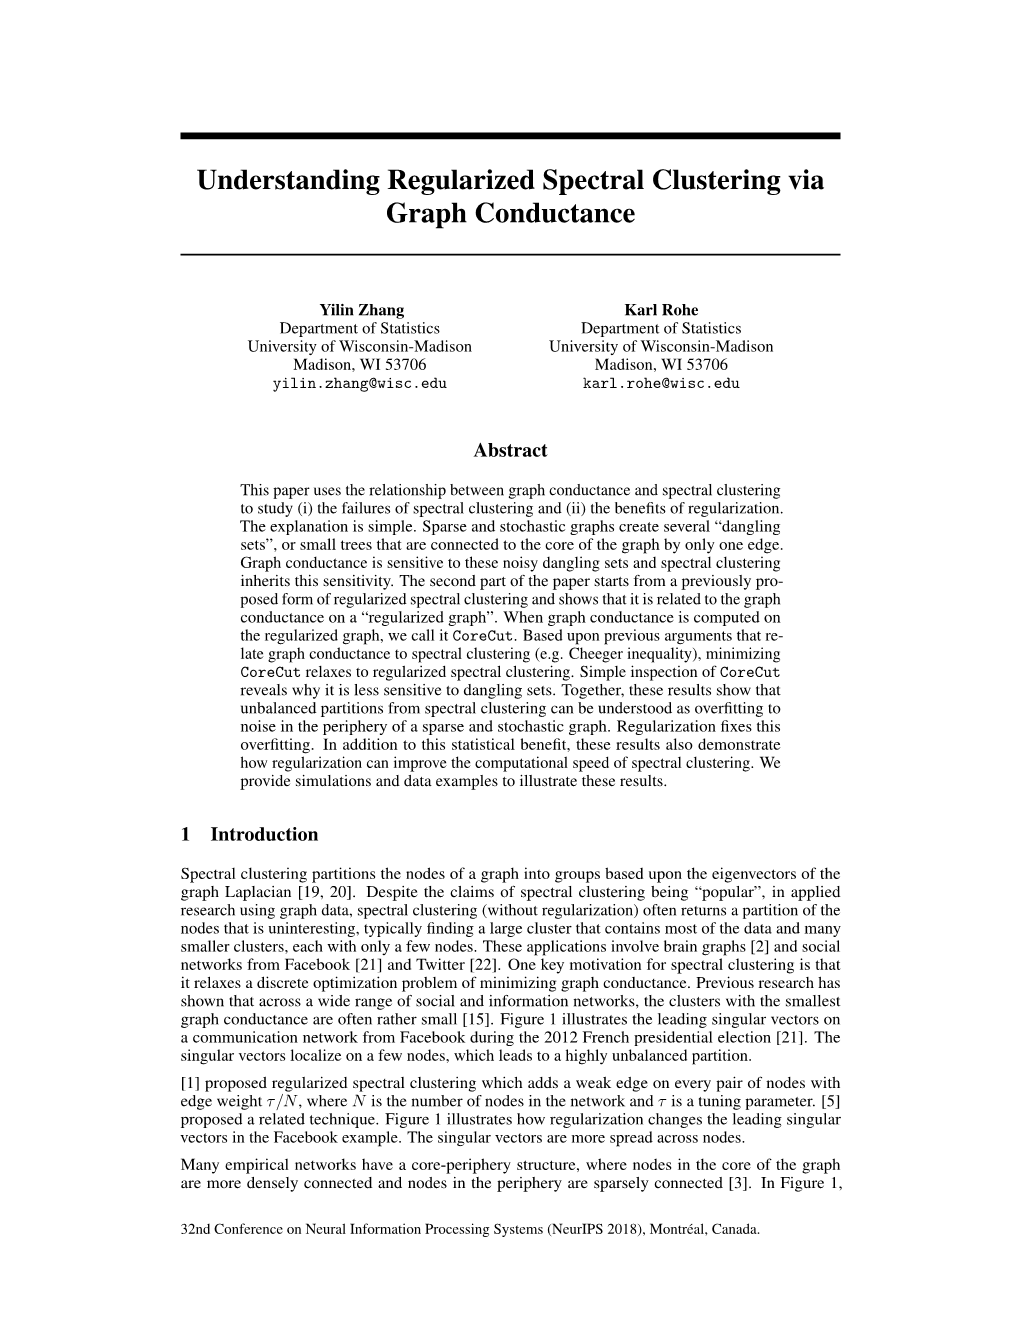 Understanding Regularized Spectral Clustering Via Graph Conductance